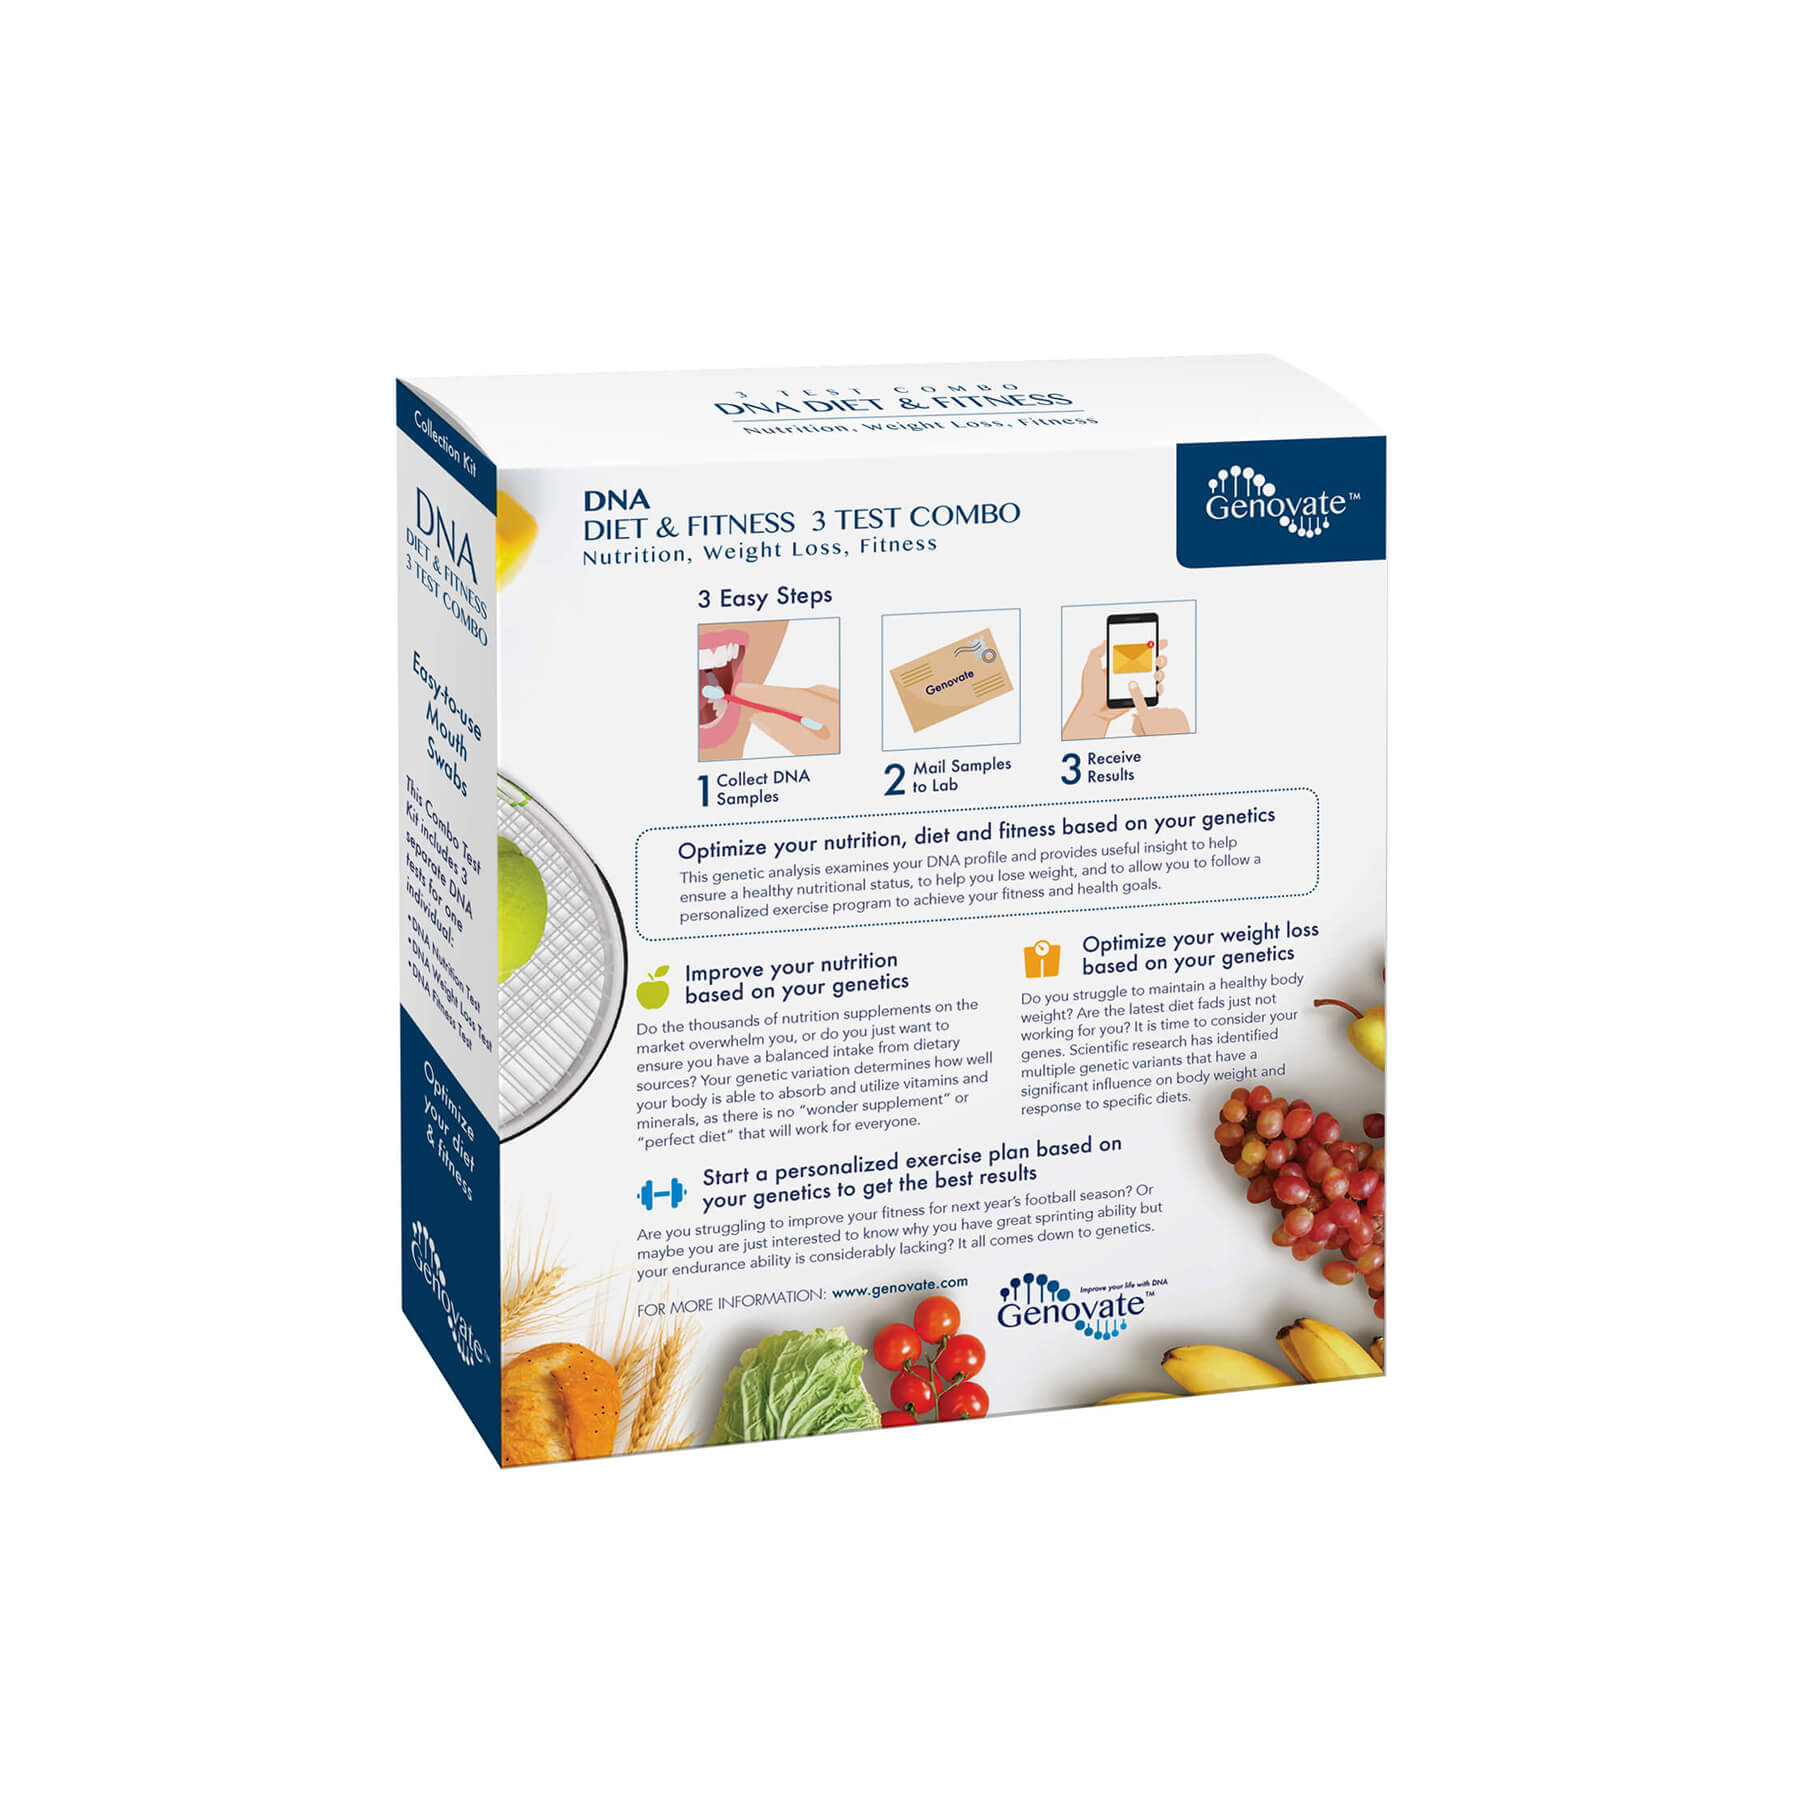 DNA Diet & Fitness 3 Test Combo - Precision Lab Works 